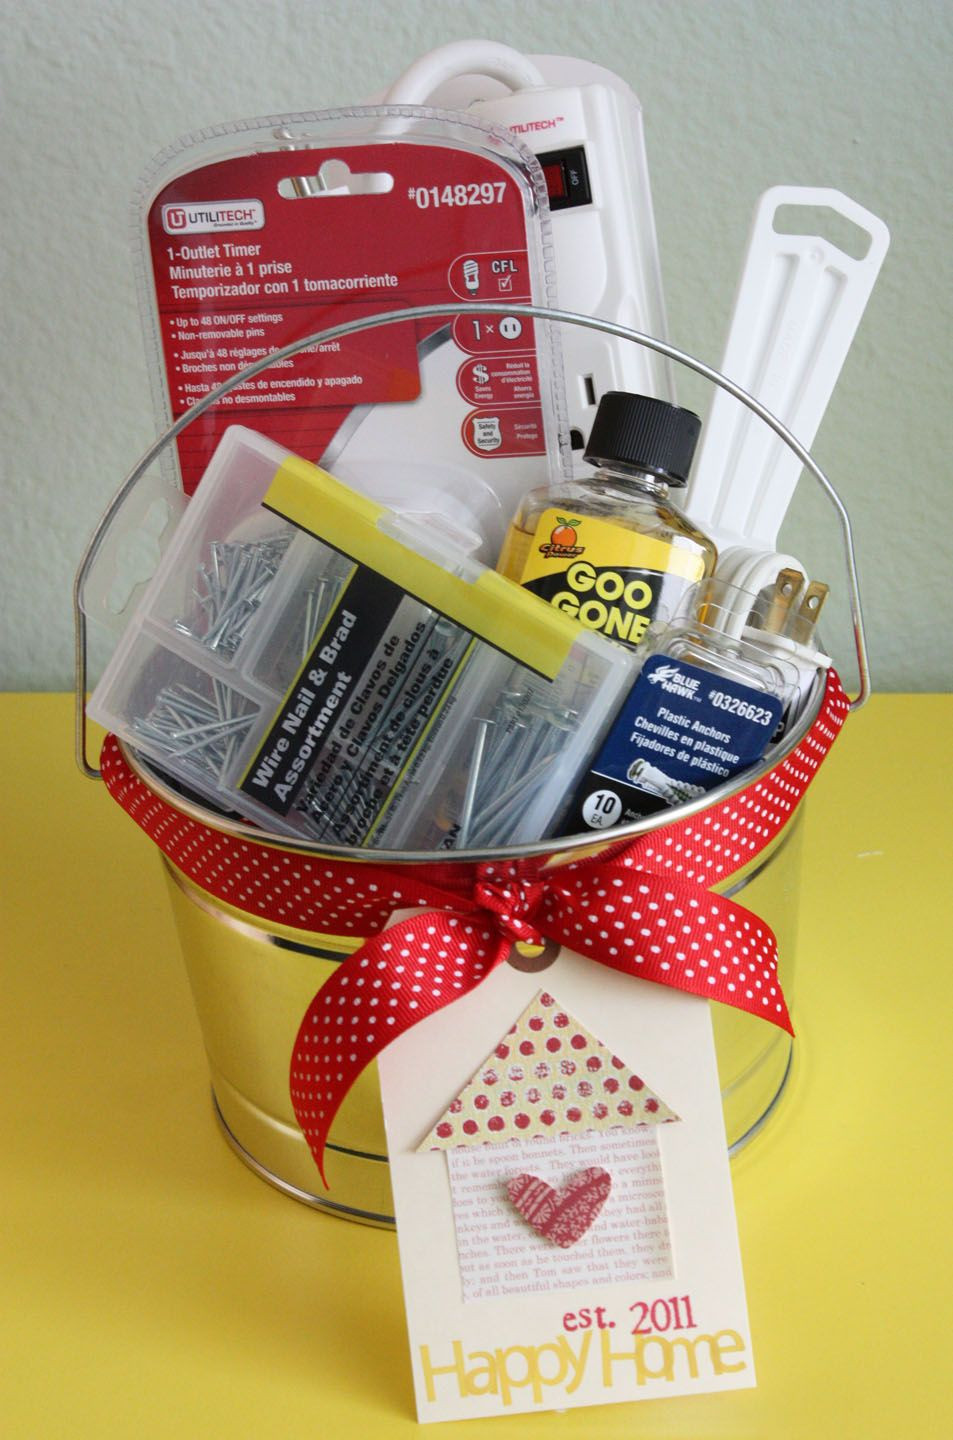 New Home Gift Basket Ideas
 A creative housewarming t for someone who recently purchased their first home ♥